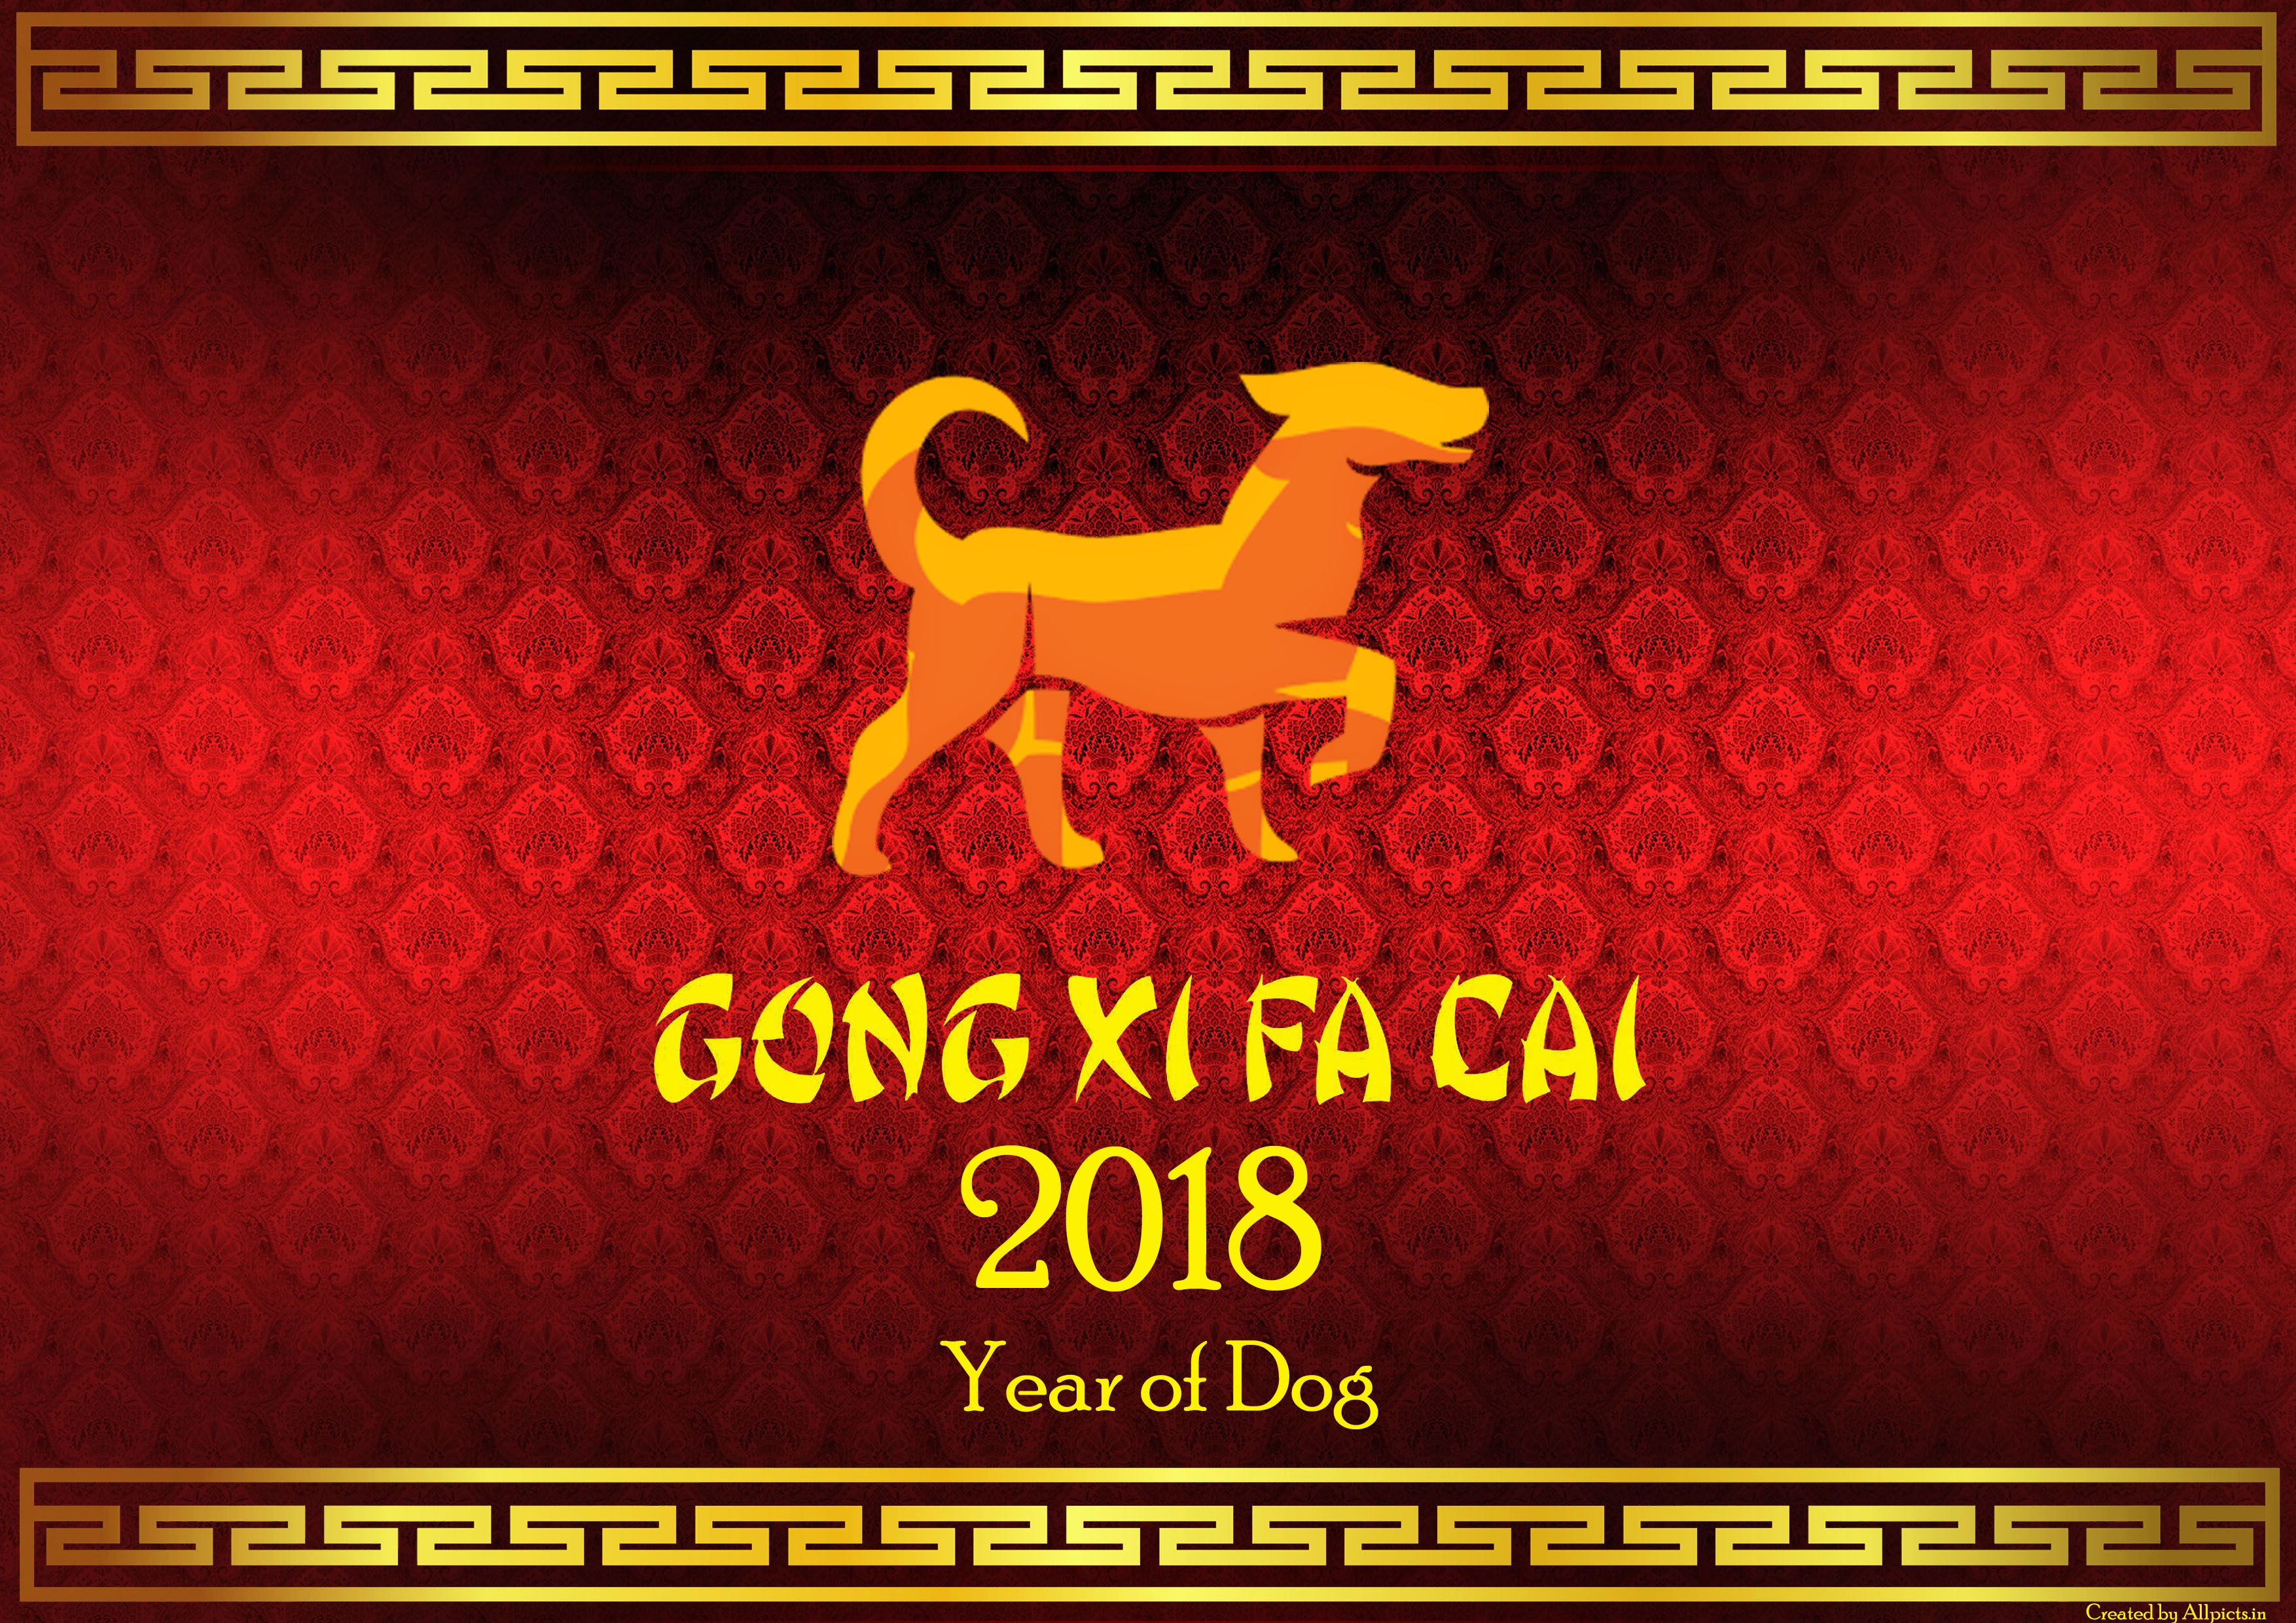 Gong xi Fat Cai 2018 Wallpaper for Chinese New Year. HD